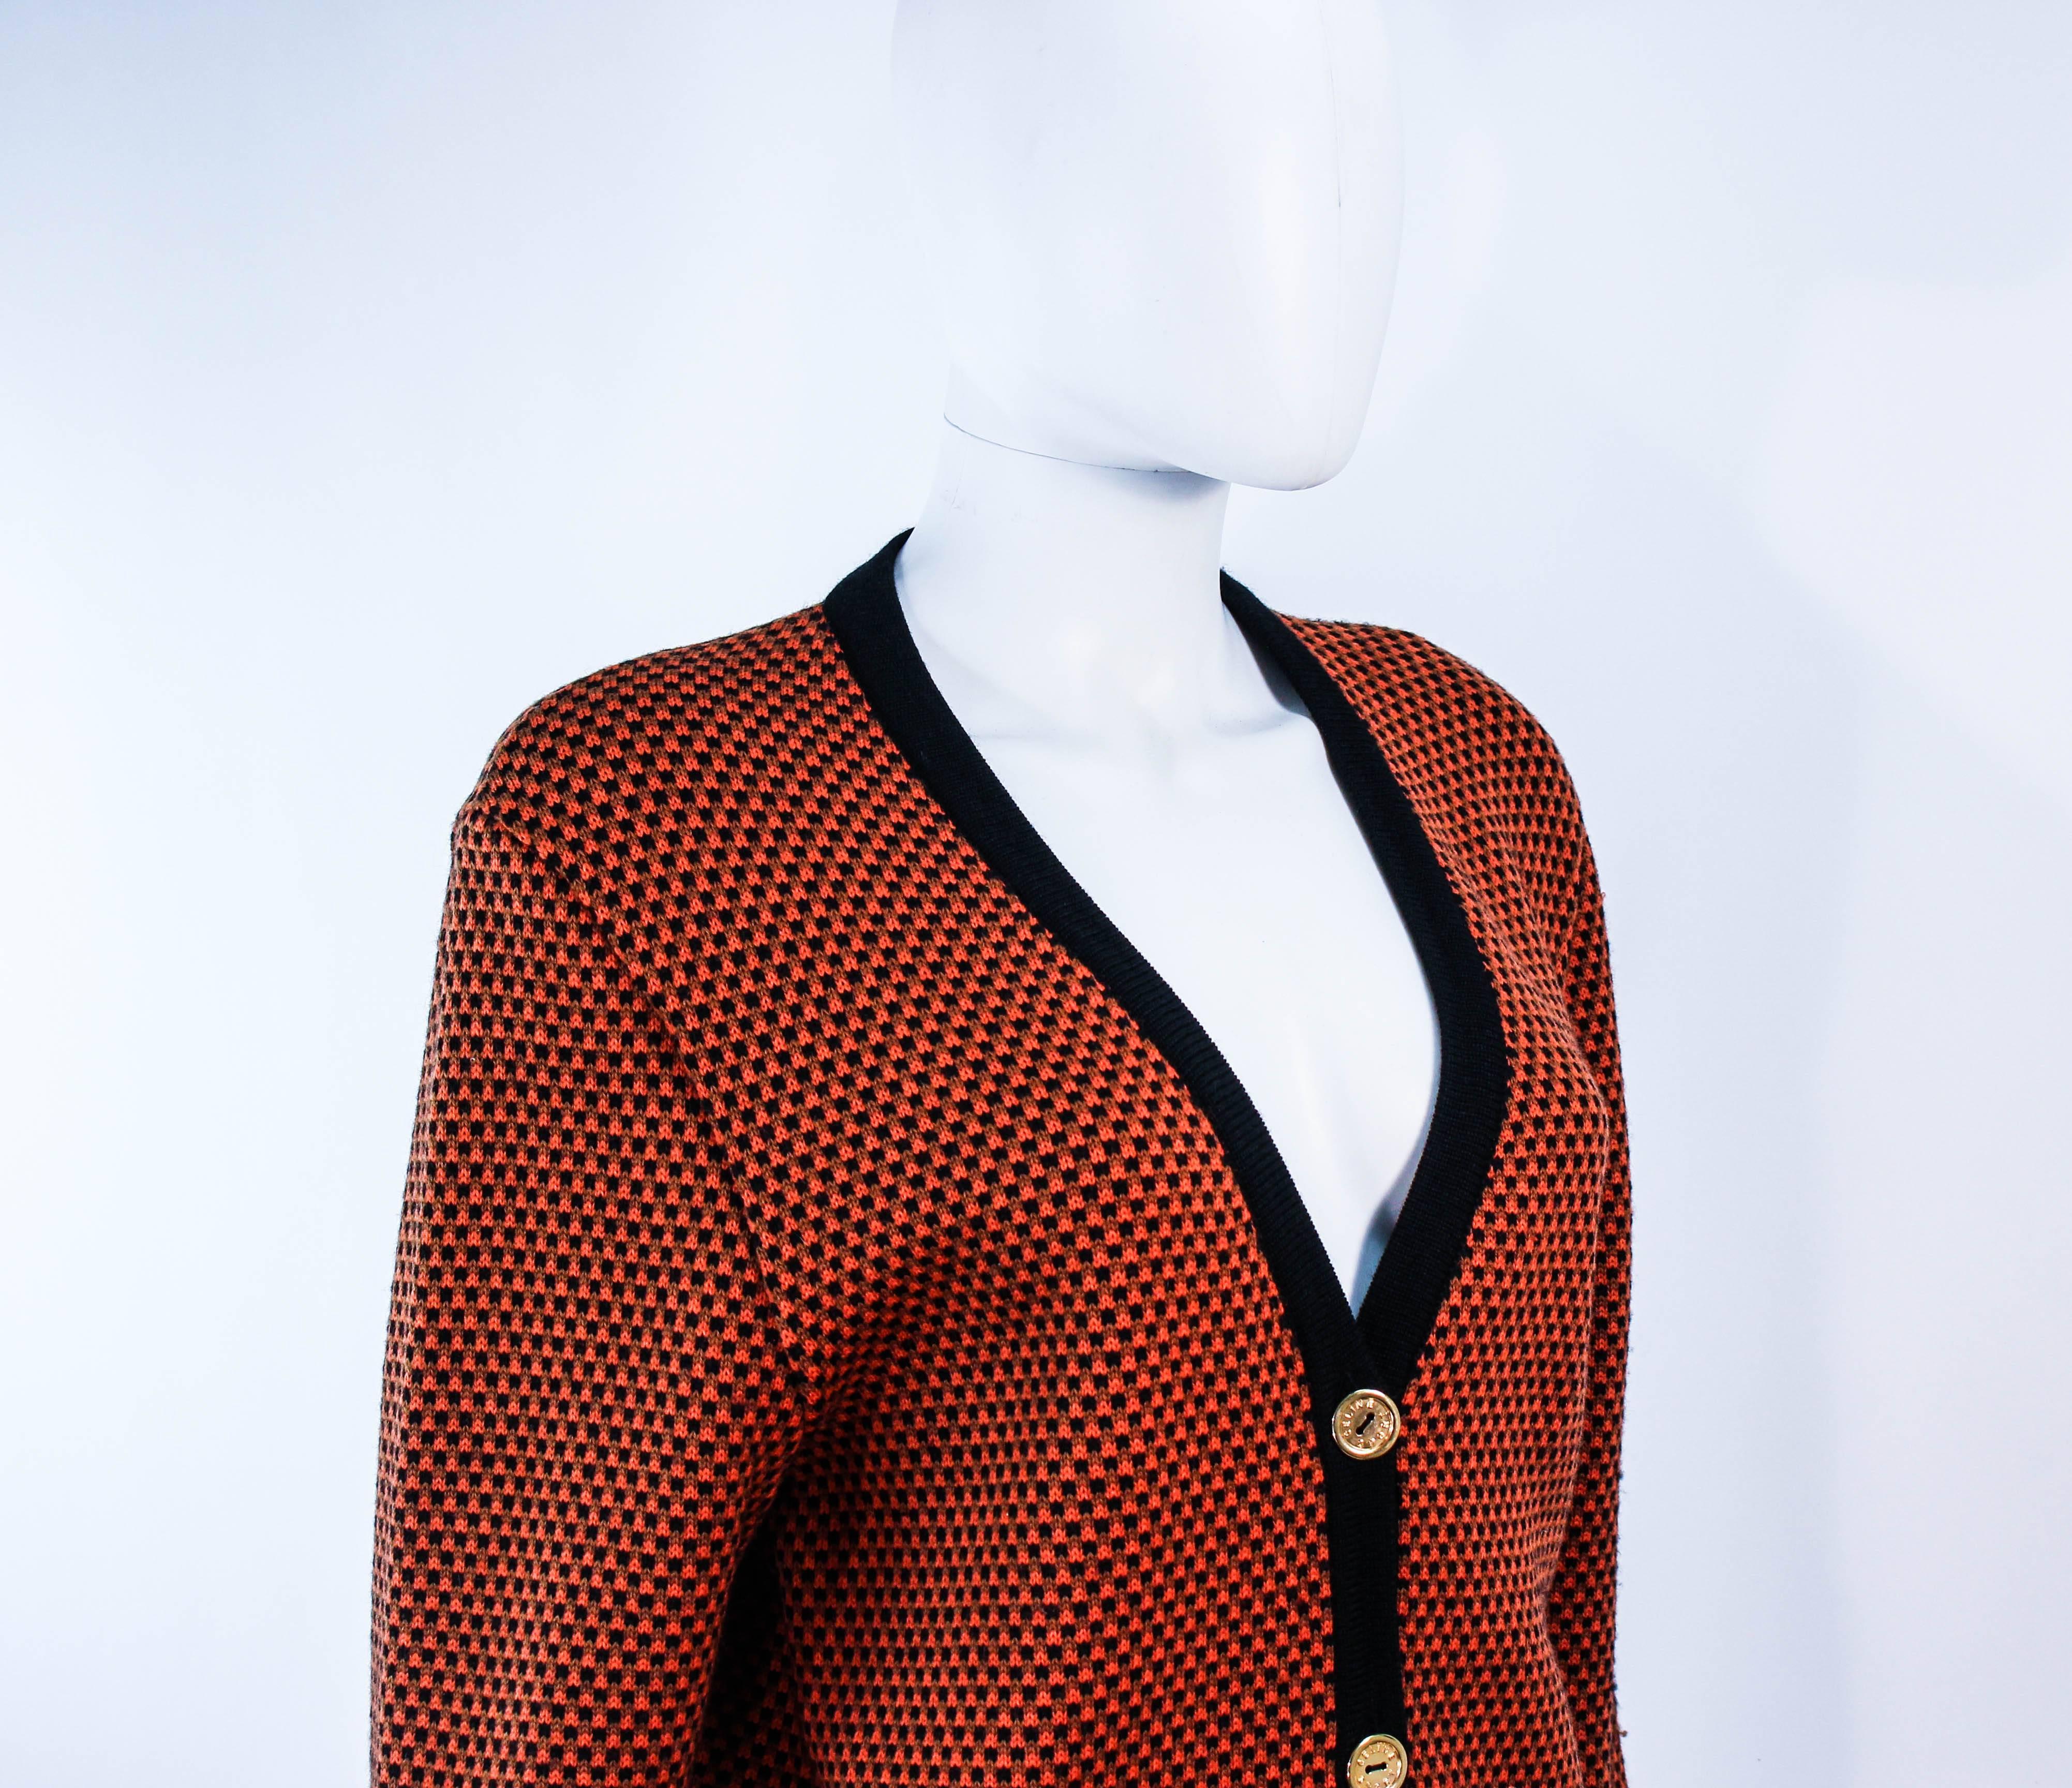 CELINE Vintage Orange & Brown Printed Wool Sweater Size 6 8 In Excellent Condition For Sale In Los Angeles, CA